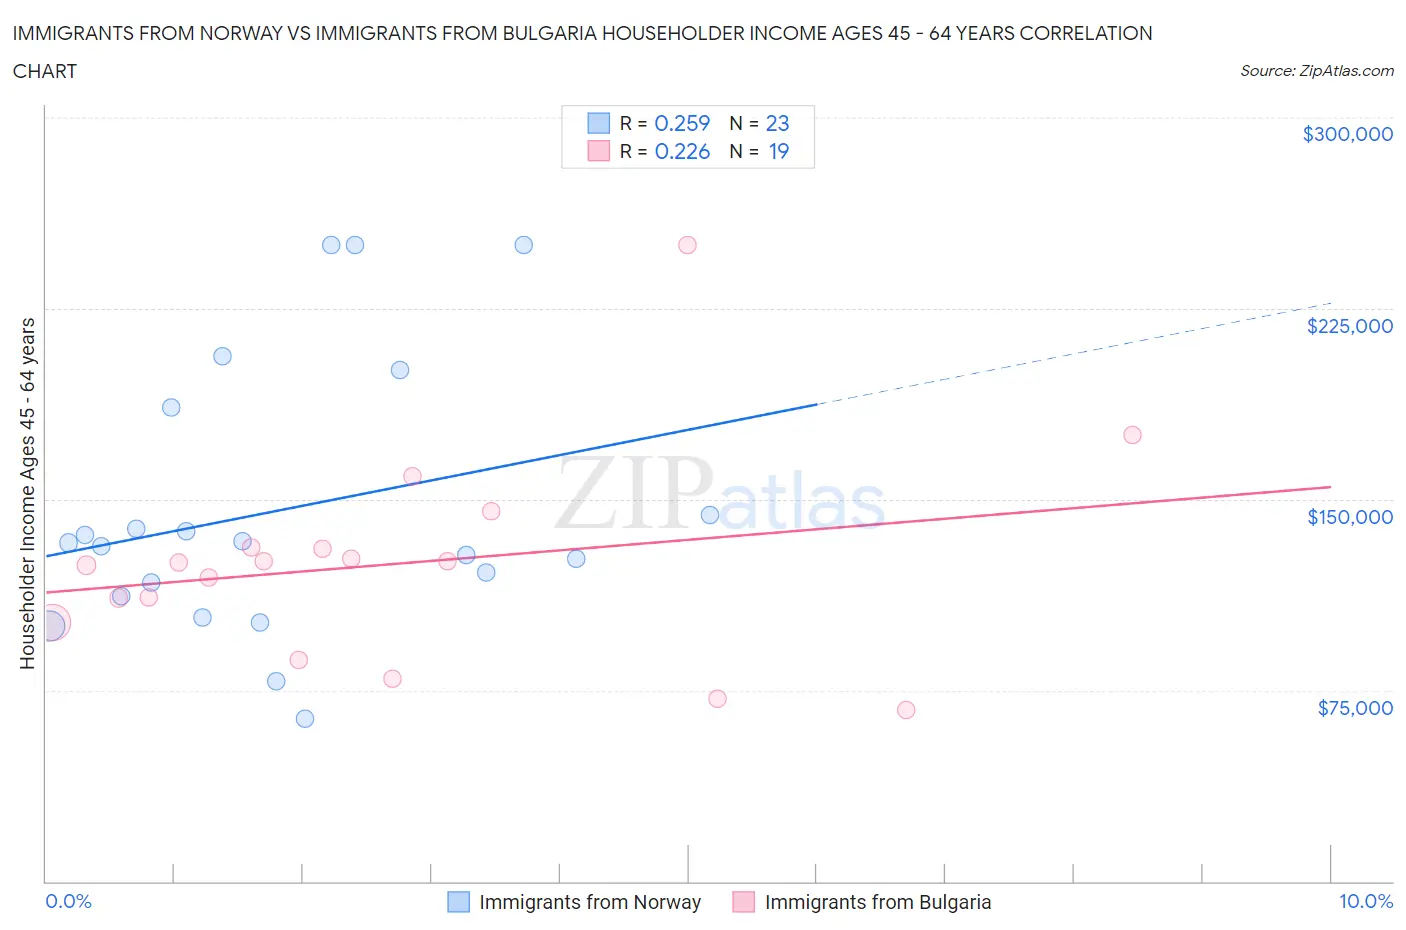 Immigrants from Norway vs Immigrants from Bulgaria Householder Income Ages 45 - 64 years